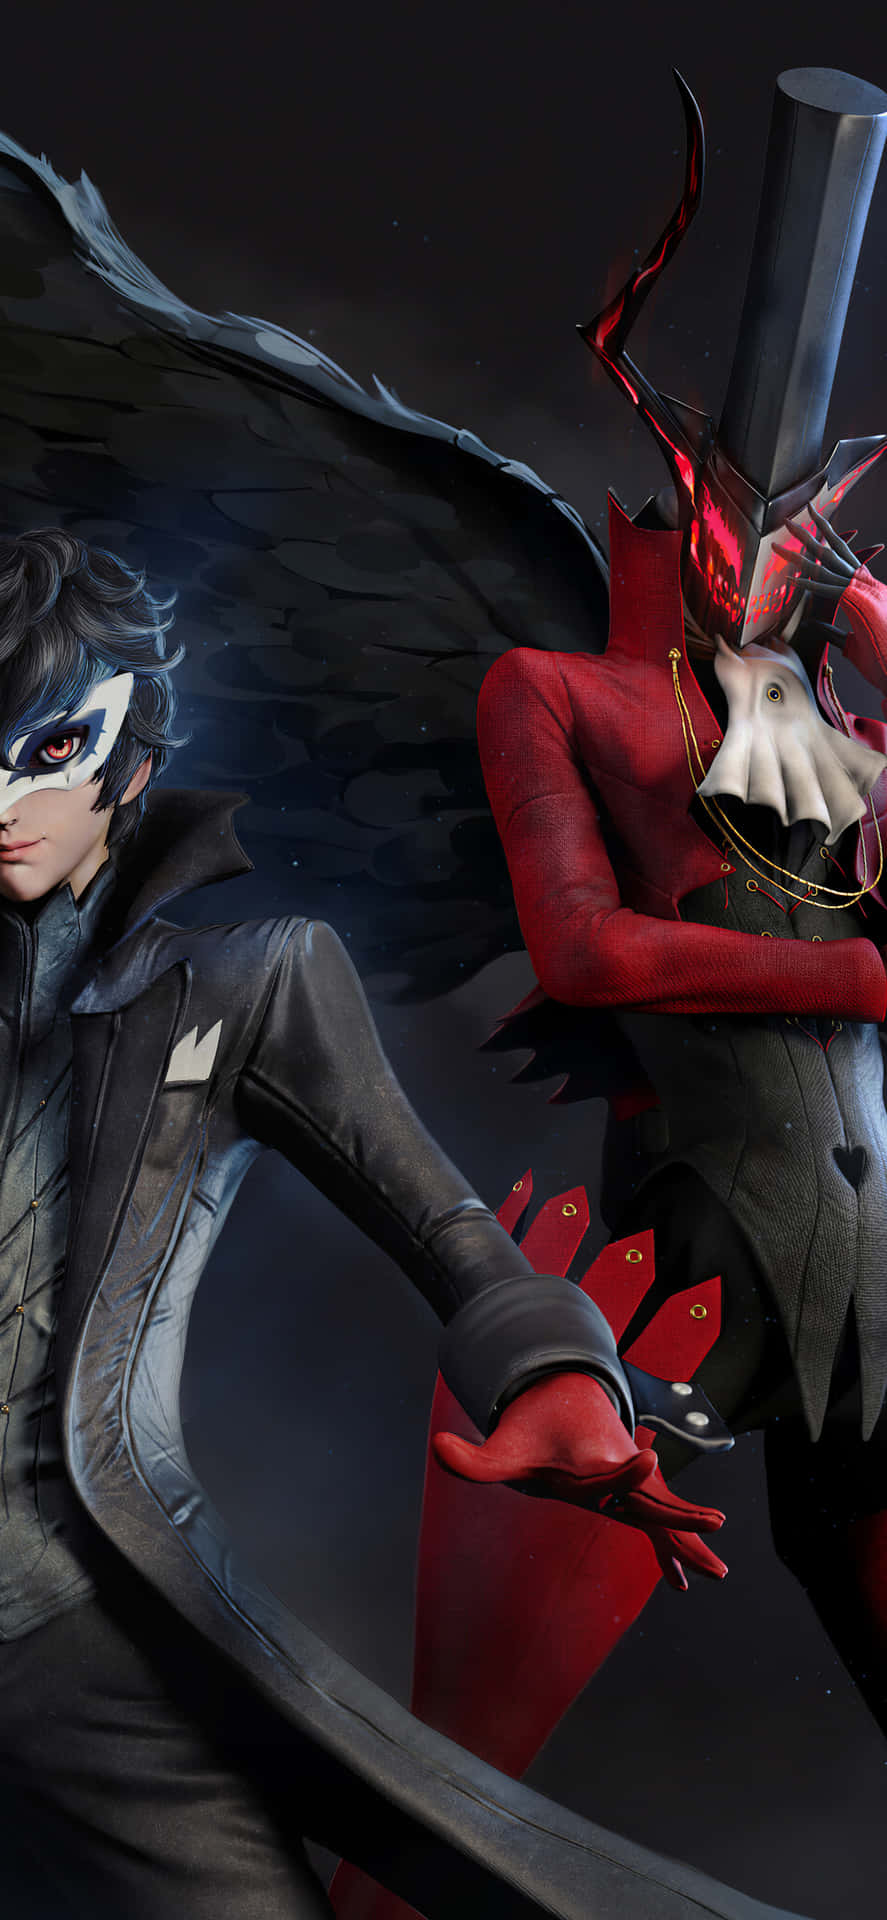 Take your Phantom Thieving experience to the next level with the Persona 5 Iphone Wallpaper